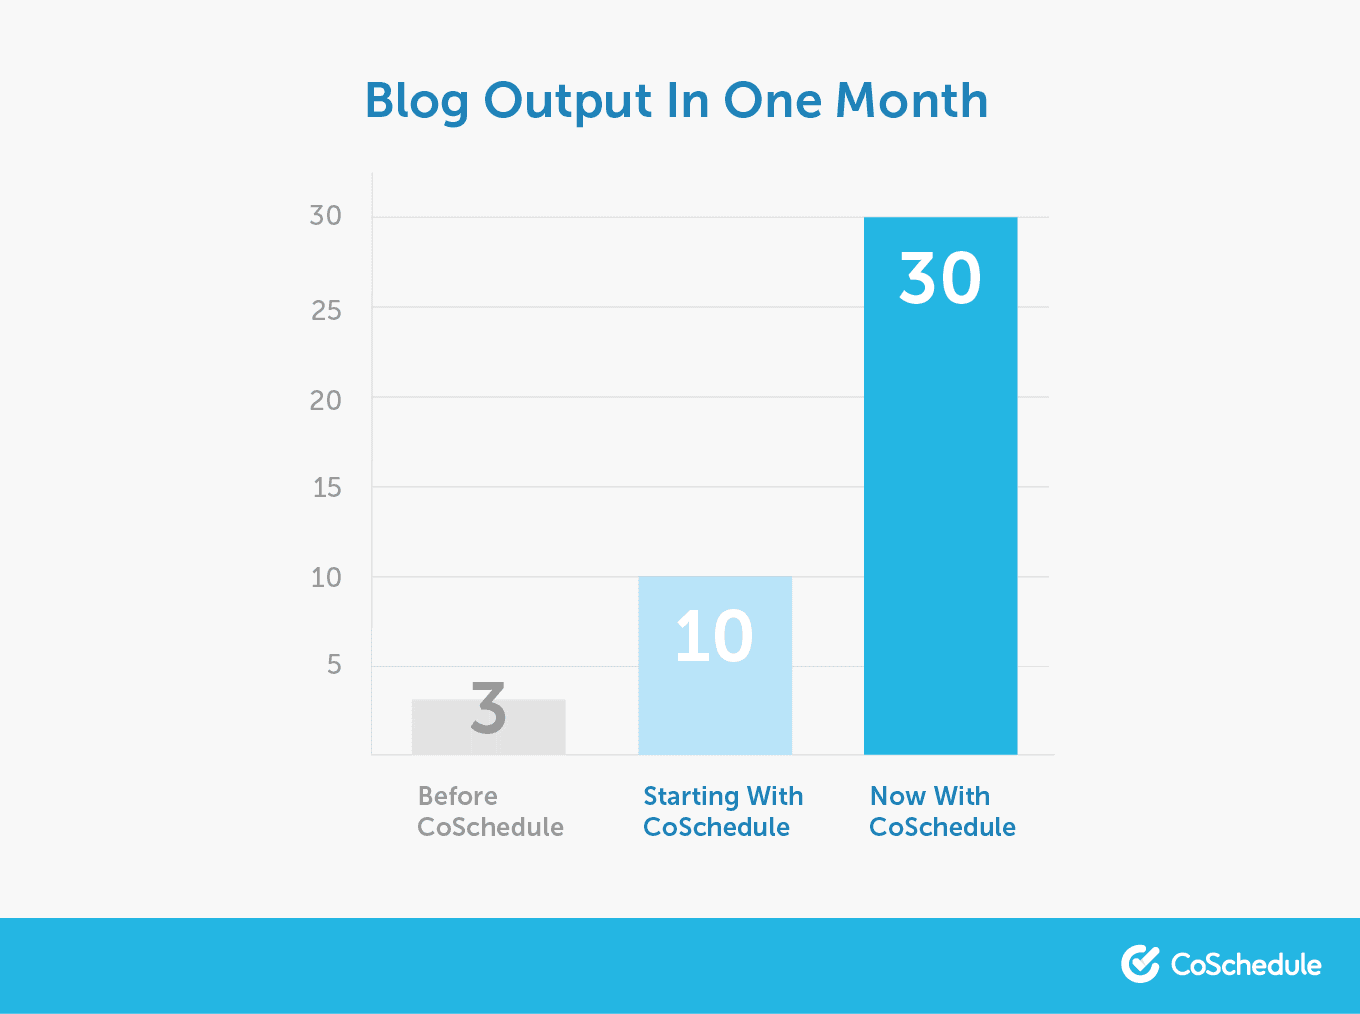 CoSchedule blog output for one month